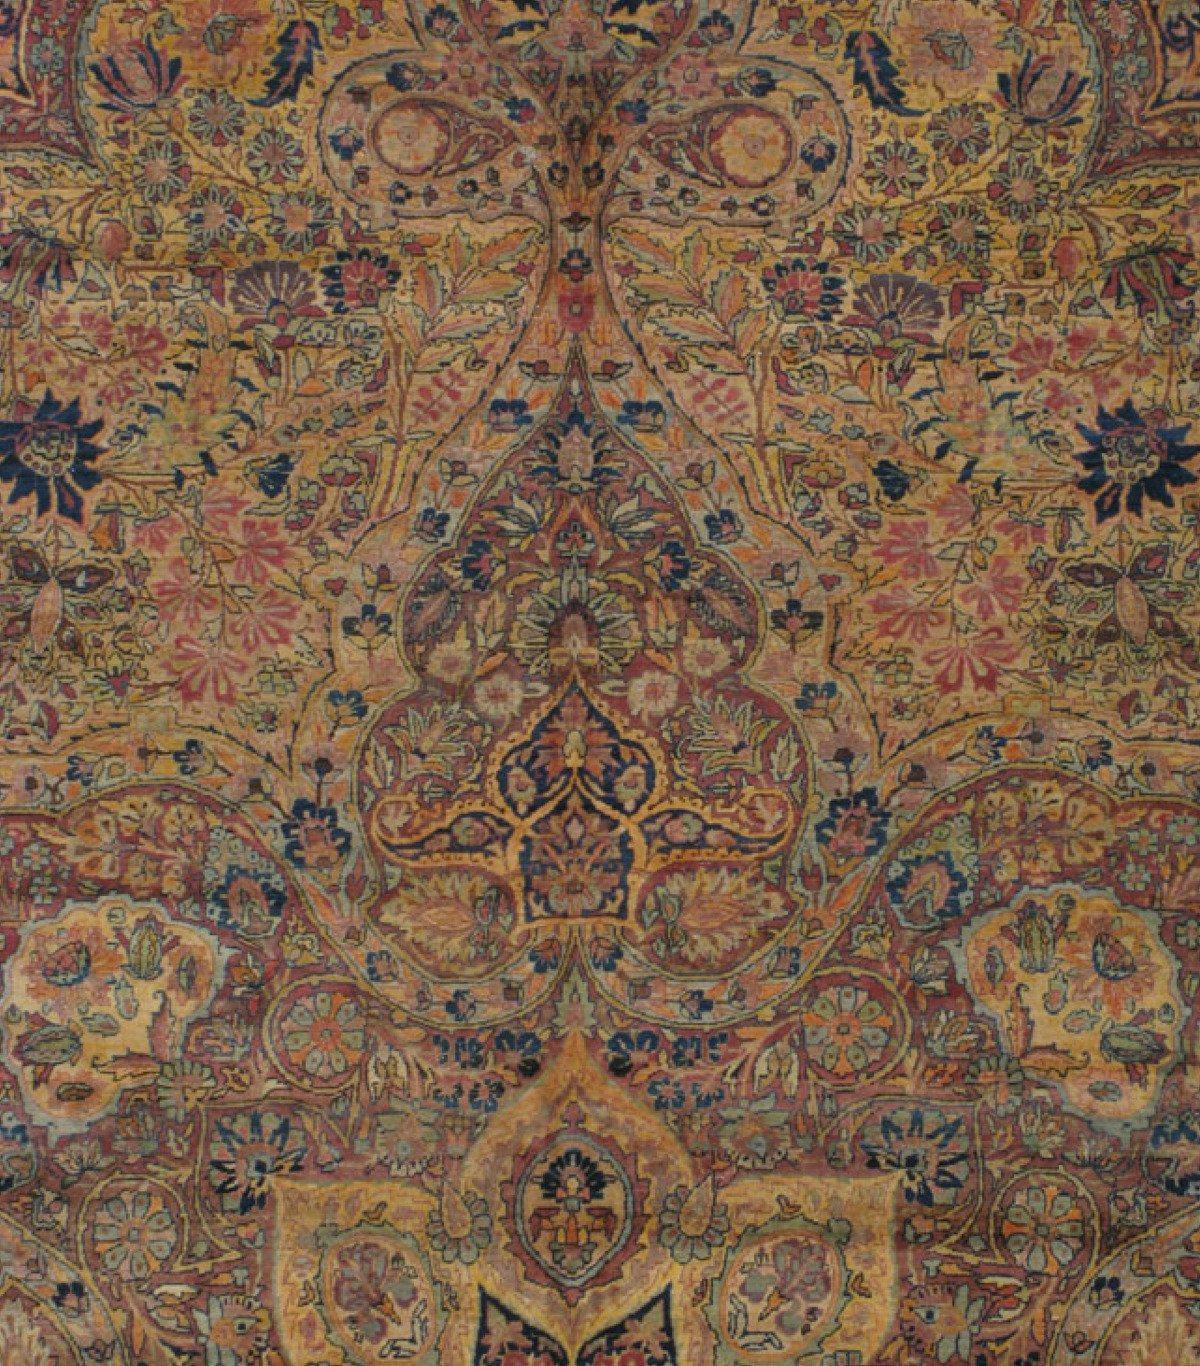 This is an exquisite antique oversize Persian gold floral Kirman Lavar rug circa 1880s-1900s measuring 17 x 23 ft in pristine condition.

The carpets produced in Lavar are often included in the general category of Kerman rugs (as Lavar is a small